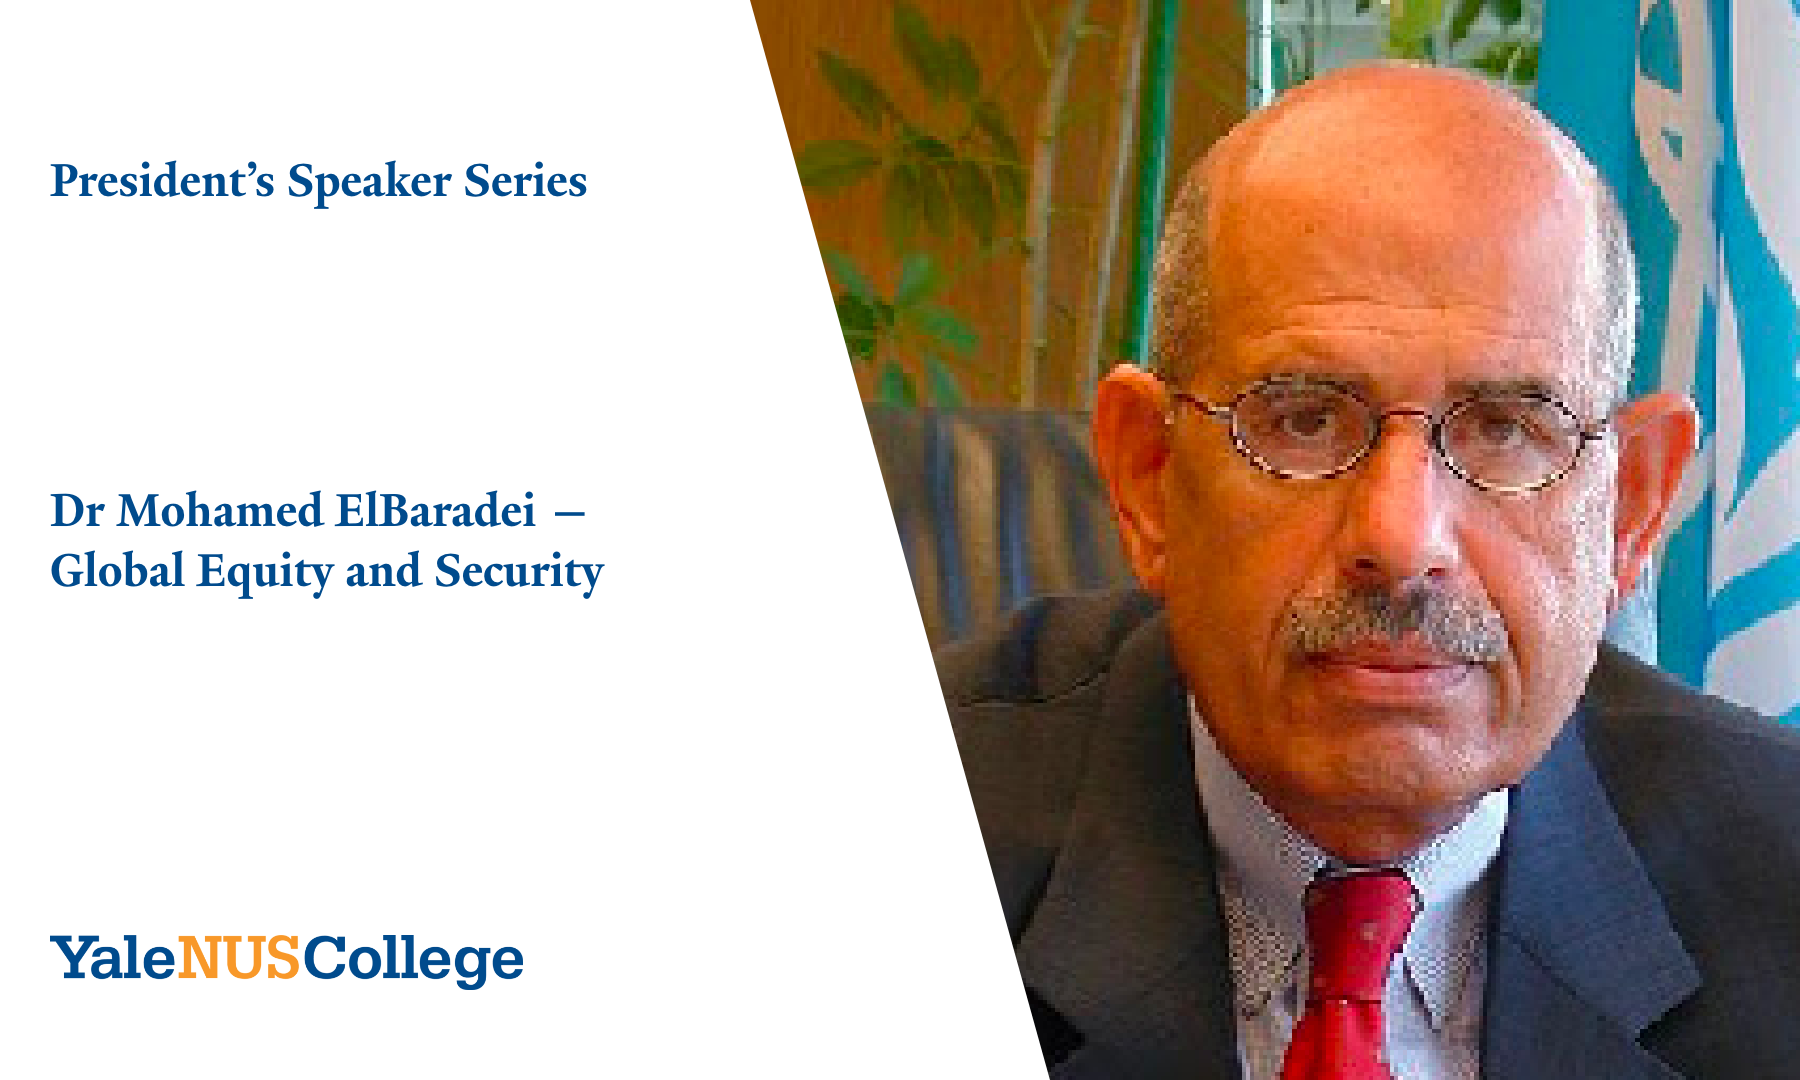 Dr Mohamed ElBaradei -- Global Equity and Security